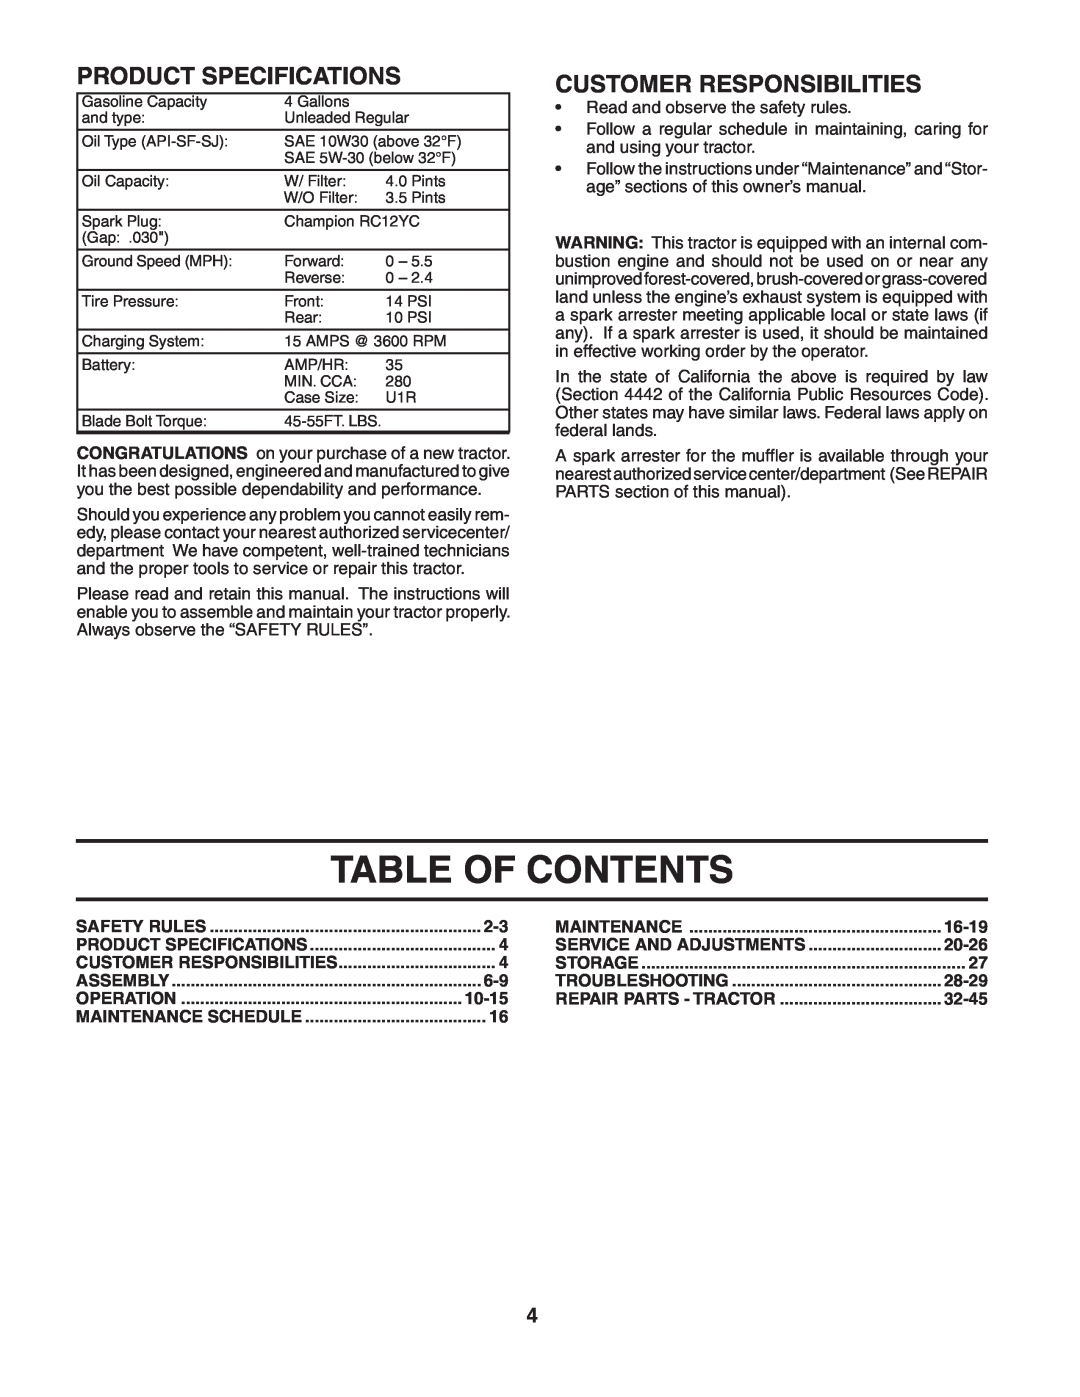 Husqvarna YTH2248 owner manual Table Of Contents, Product Specifications, Customer Responsibilities 